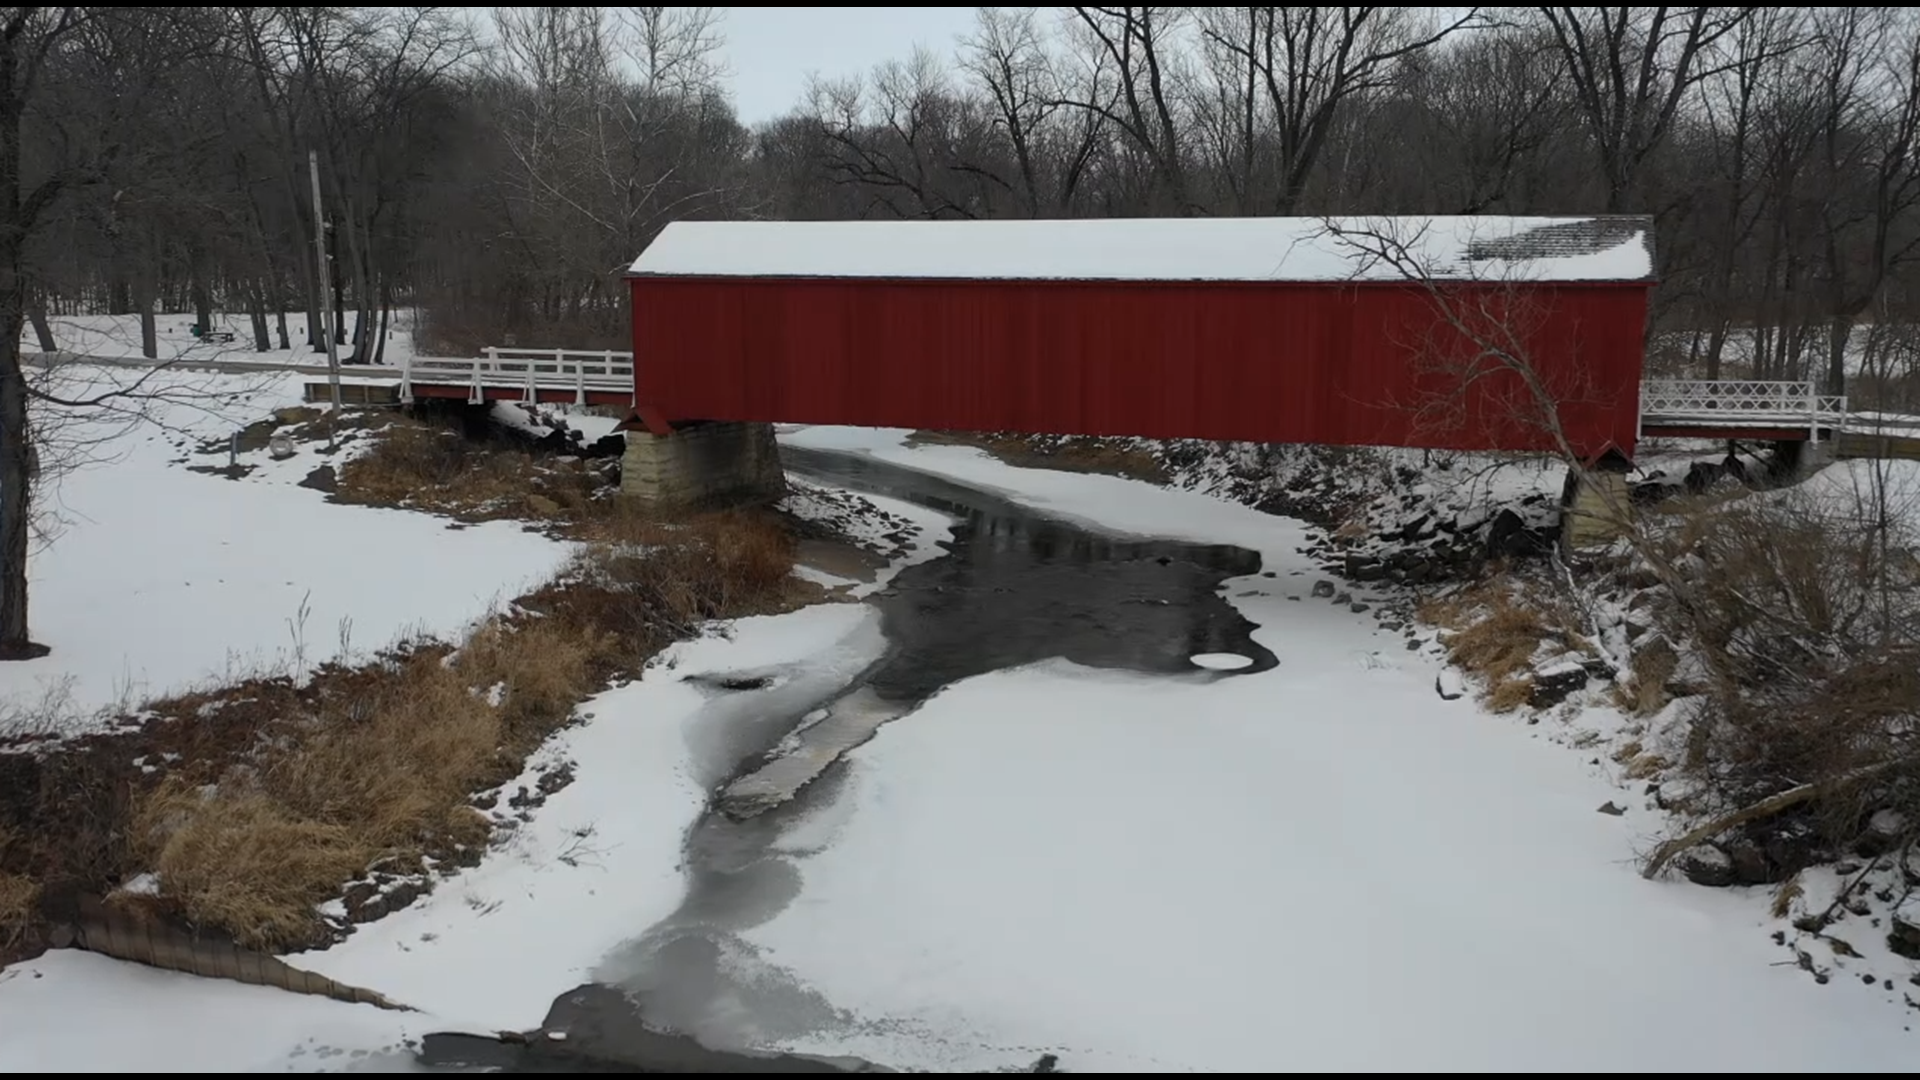 Illinois only has 9 covered bridges statewide and two of them happen to be in Princeton.